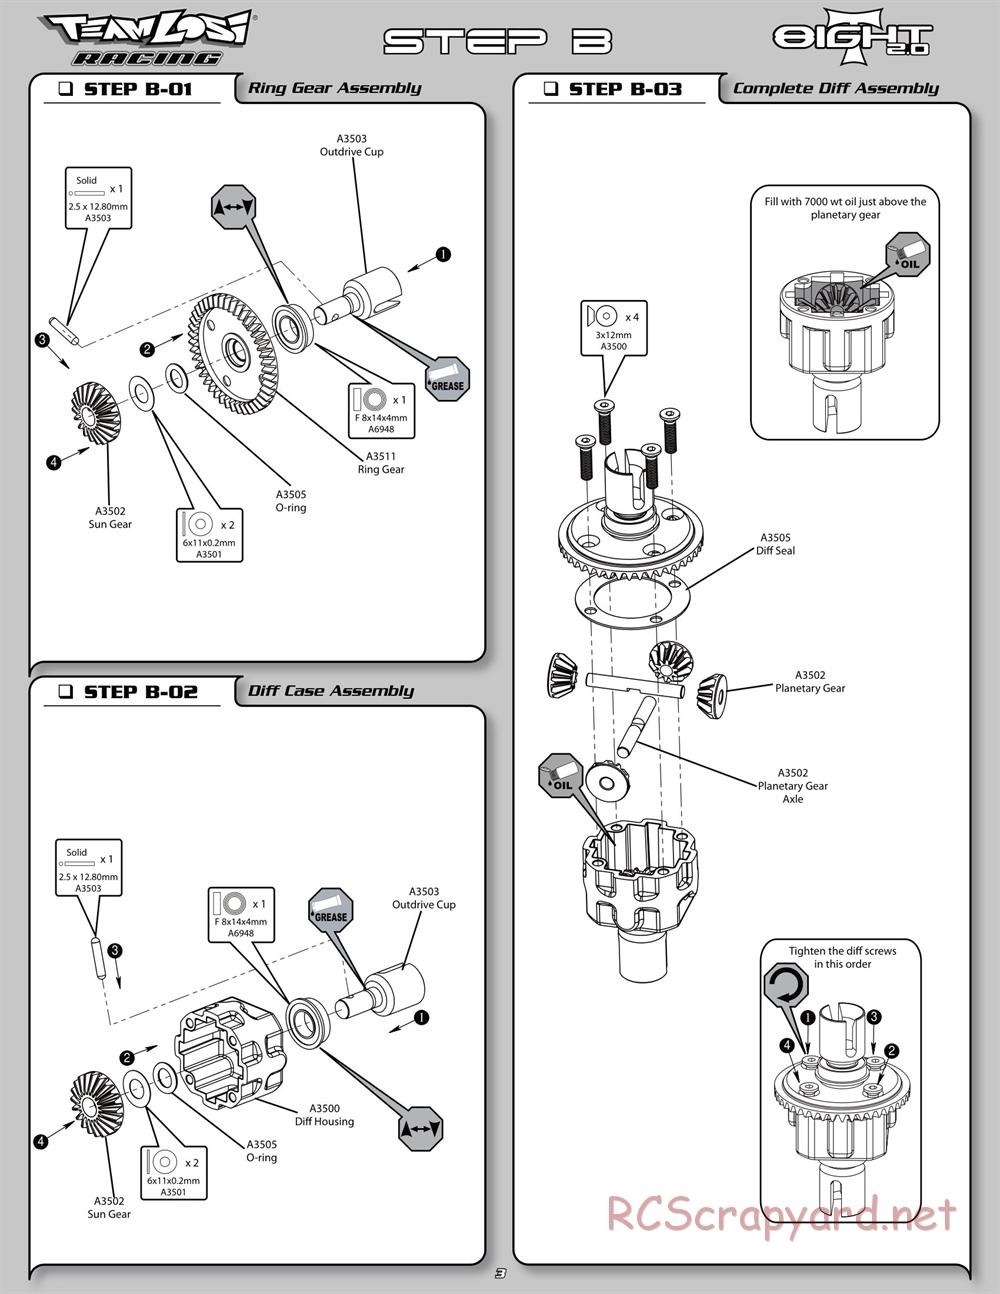 Team Losi - 8ight-T 2.0 Race Roller - Manual - Page 8